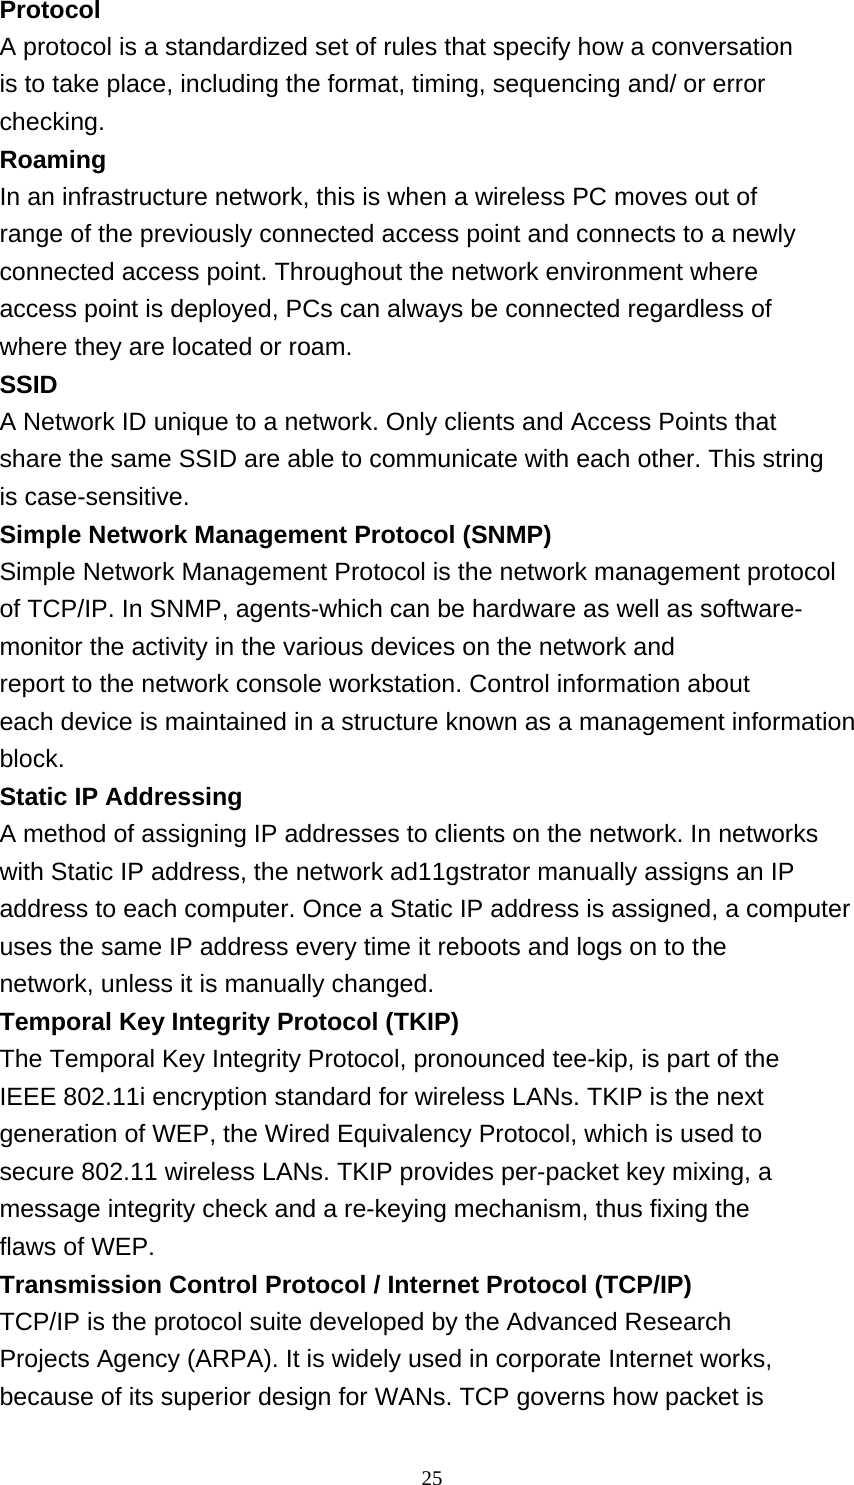    25 Protocol A protocol is a standardized set of rules that specify how a conversation is to take place, including the format, timing, sequencing and/ or error checking. Roaming In an infrastructure network, this is when a wireless PC moves out of range of the previously connected access point and connects to a newly connected access point. Throughout the network environment where access point is deployed, PCs can always be connected regardless of where they are located or roam. SSID A Network ID unique to a network. Only clients and Access Points that share the same SSID are able to communicate with each other. This string is case-sensitive. Simple Network Management Protocol (SNMP) Simple Network Management Protocol is the network management protocol of TCP/IP. In SNMP, agents-which can be hardware as well as software- monitor the activity in the various devices on the network and report to the network console workstation. Control information about each device is maintained in a structure known as a management information block. Static IP Addressing A method of assigning IP addresses to clients on the network. In networks with Static IP address, the network ad11gstrator manually assigns an IP address to each computer. Once a Static IP address is assigned, a computer uses the same IP address every time it reboots and logs on to the network, unless it is manually changed. Temporal Key Integrity Protocol (TKIP) The Temporal Key Integrity Protocol, pronounced tee-kip, is part of the IEEE 802.11i encryption standard for wireless LANs. TKIP is the next generation of WEP, the Wired Equivalency Protocol, which is used to secure 802.11 wireless LANs. TKIP provides per-packet key mixing, a message integrity check and a re-keying mechanism, thus fixing the flaws of WEP. Transmission Control Protocol / Internet Protocol (TCP/IP) TCP/IP is the protocol suite developed by the Advanced Research Projects Agency (ARPA). It is widely used in corporate Internet works, because of its superior design for WANs. TCP governs how packet is 